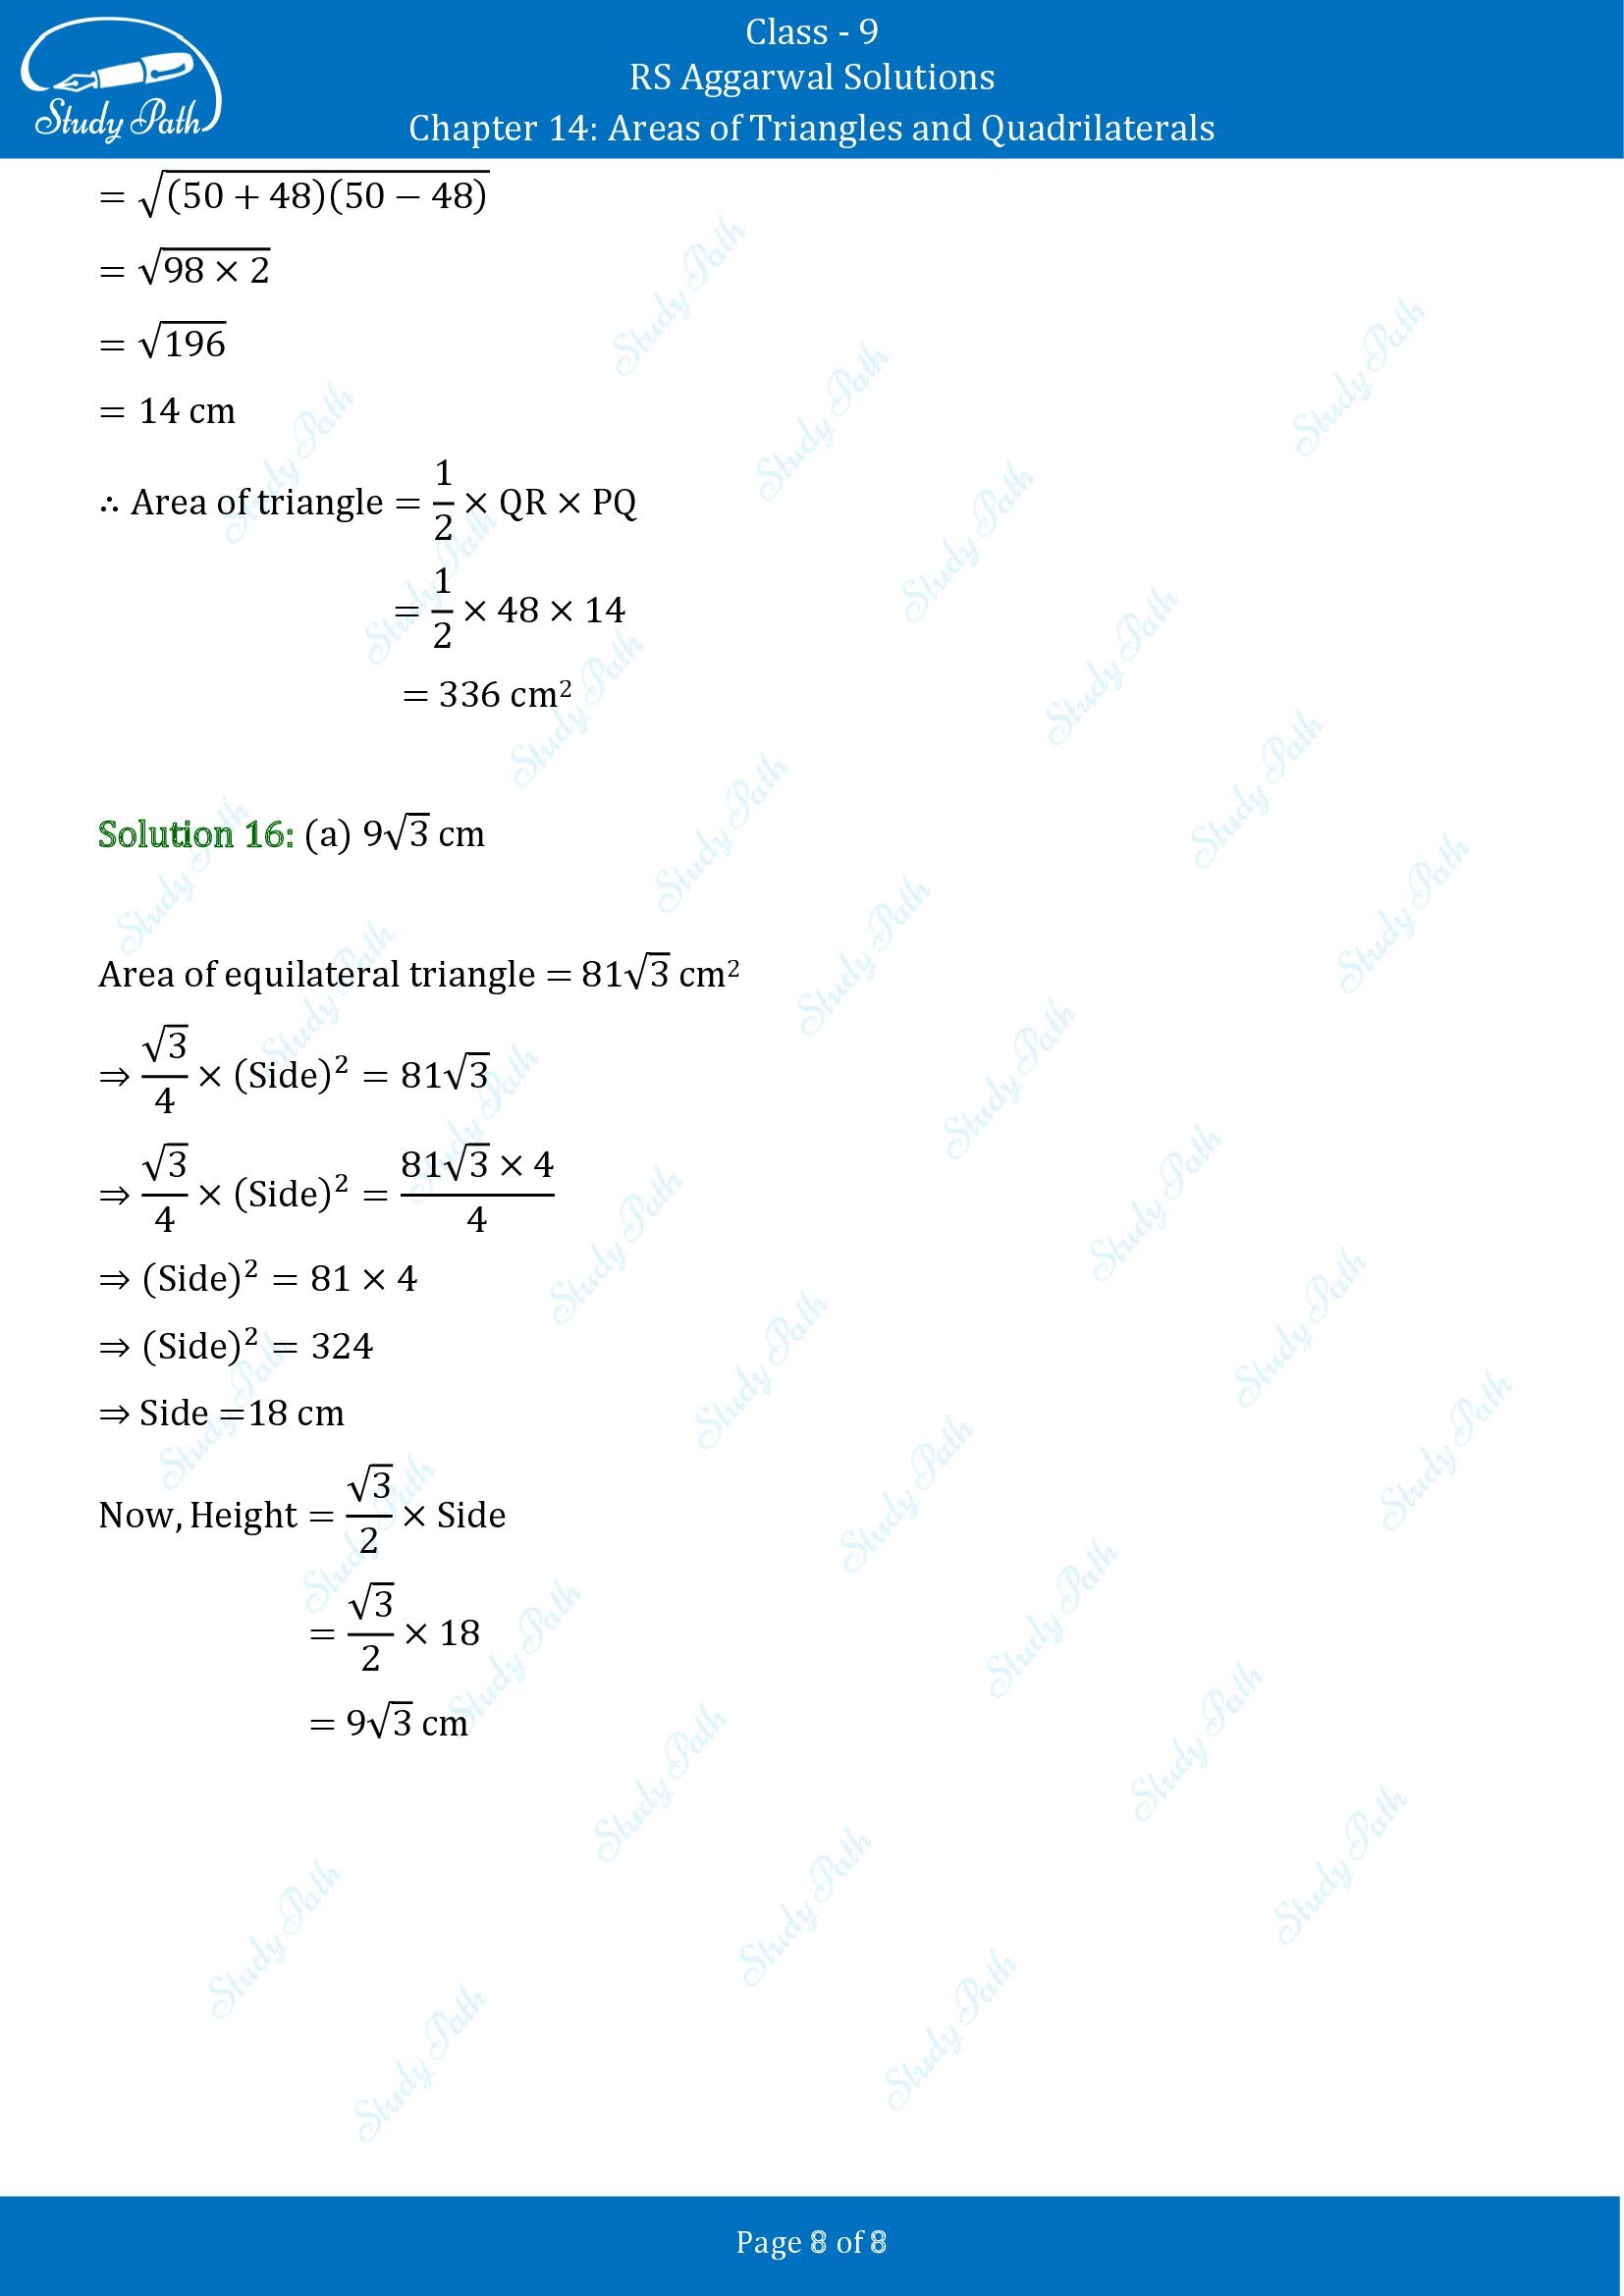 RS Aggarwal Solutions Class 9 Chapter 14 Areas of Triangles and Quadrilaterals Multiple Choice Questions MCQs 00008